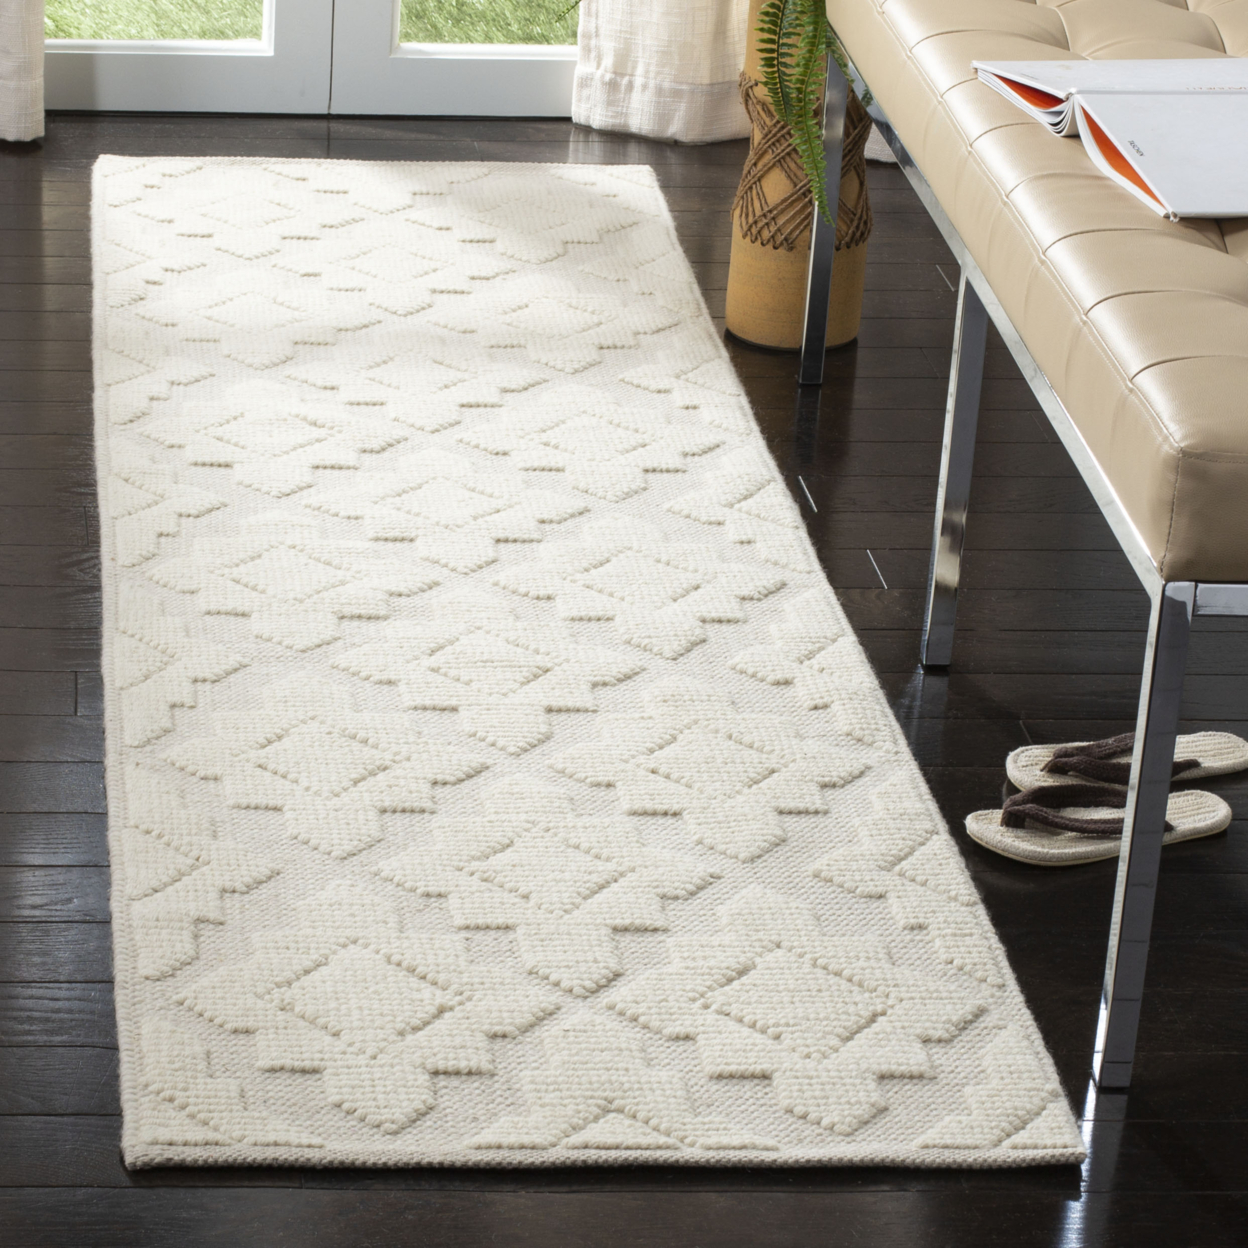 SAFAVIEH Vermont Collection VRM103A Handwoven Ivory Rug - 2-3 X 8